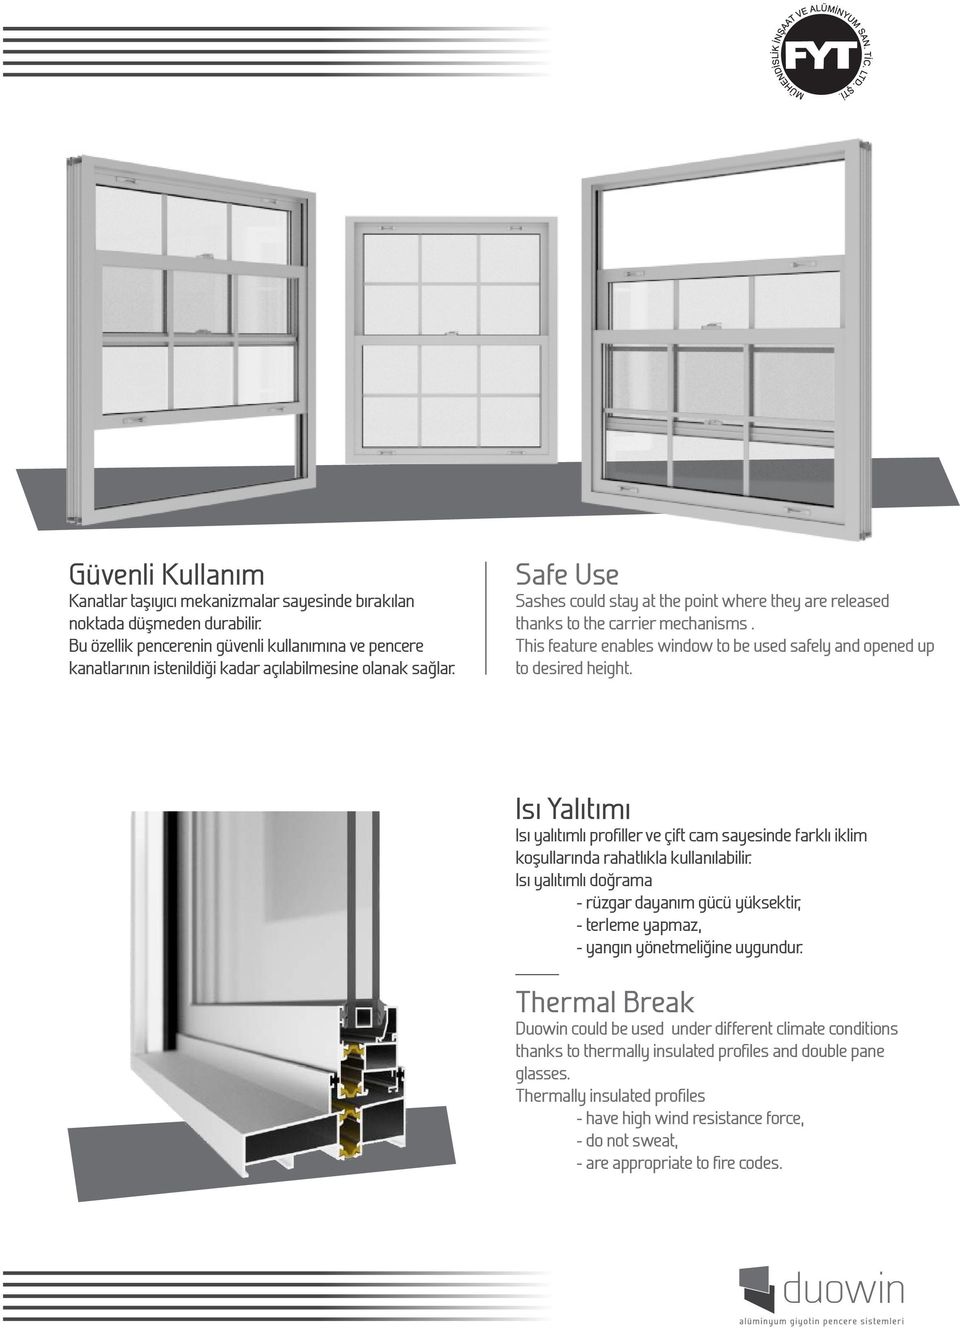 Safe Use Sashes could stay at the point where they are released thanks to the carrier mechanisms. This feature enables window to be used safely and opened up to desired height.